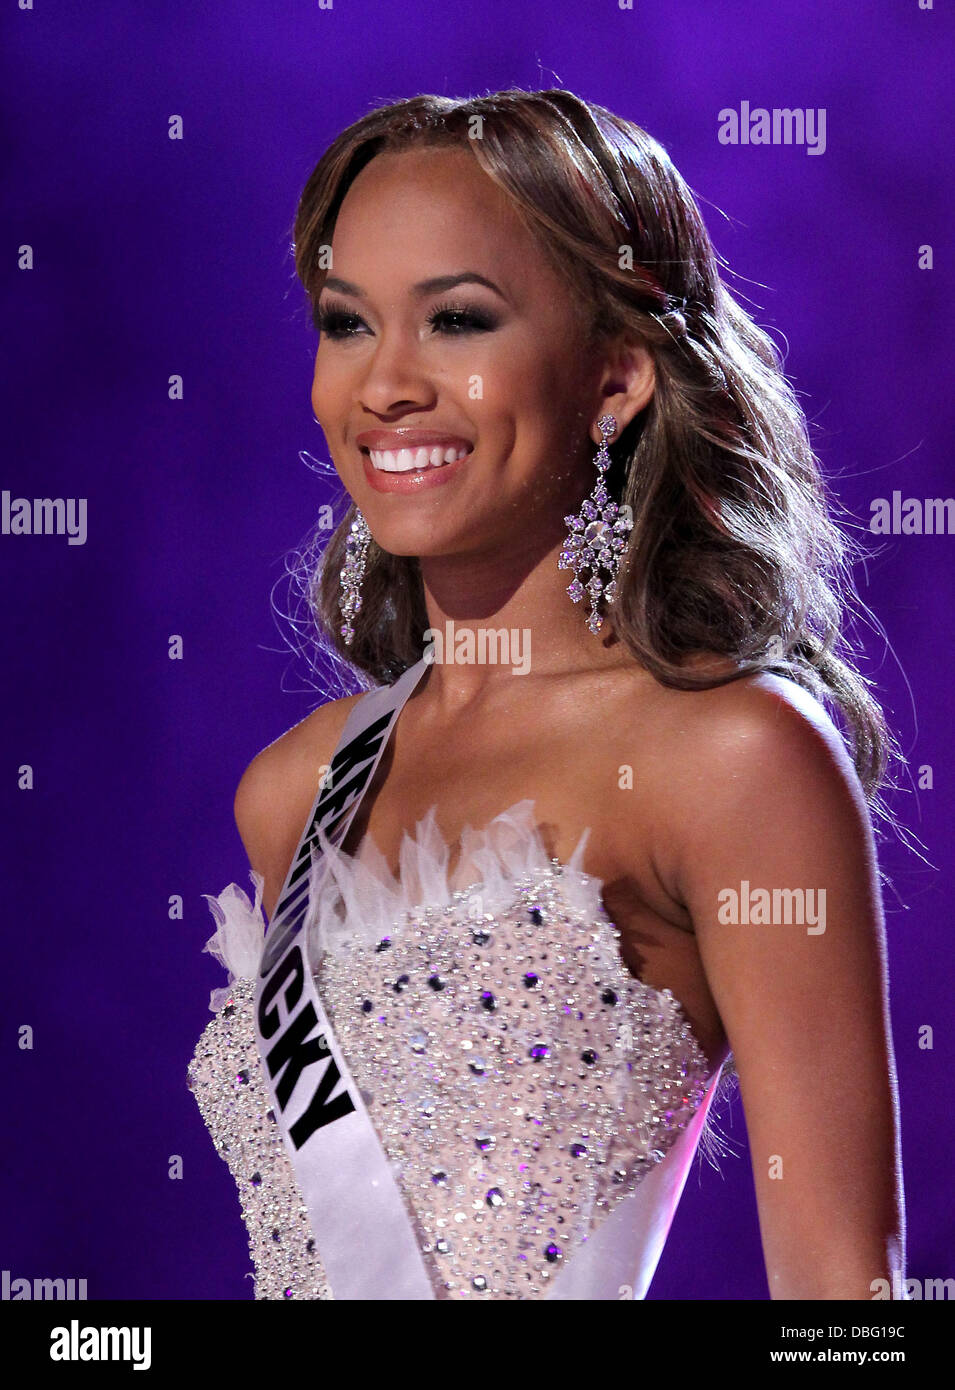 Miss Kentucky USA Kia Hampton  2011 Miss USA Preliminary Competition at The Theater of Performing Arts at Planet Hollywood Resort and Casino Las Vegas, Nevada - 15.06.11 Stock Photo